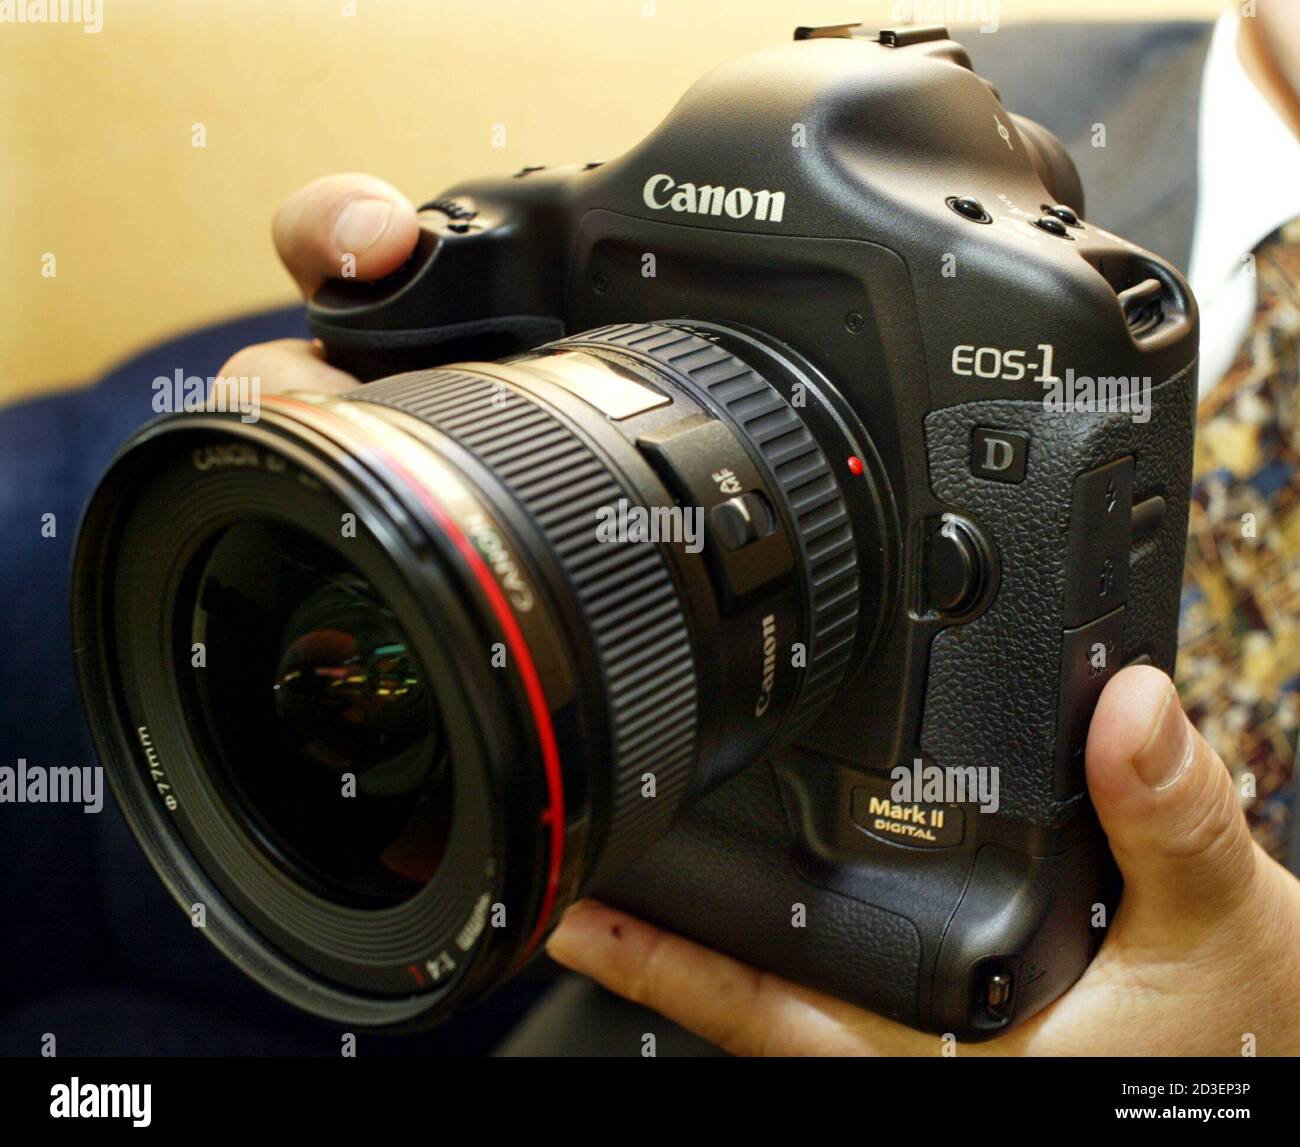 Canon eos 30 hi-res stock photography and images - Alamy